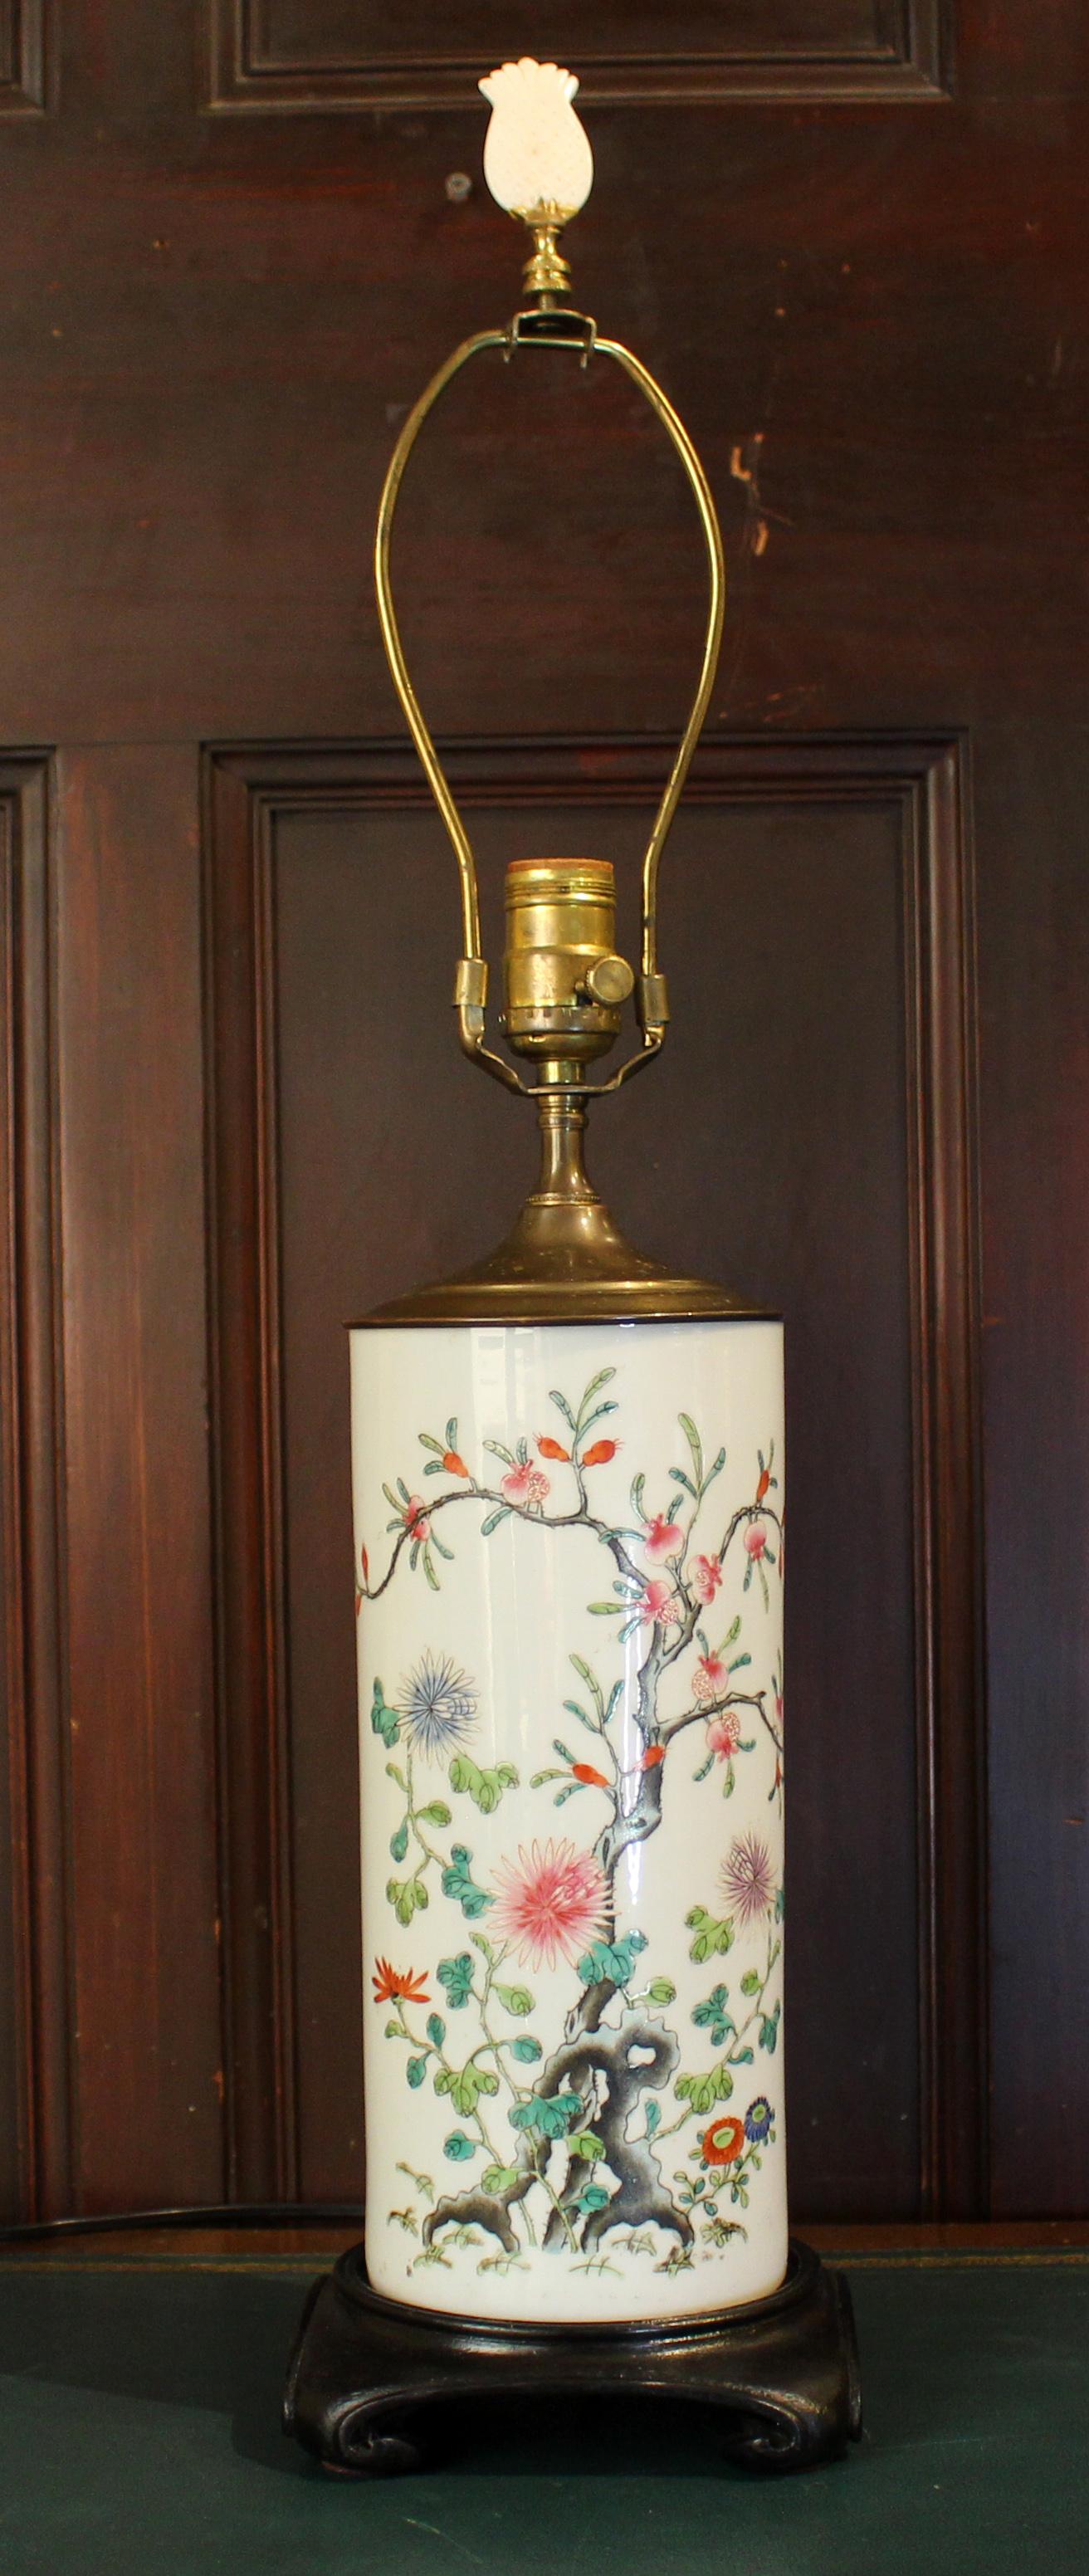 Late 19th century Chinese porcelain cylinder wig stand now mounted as a lamp. Late Qing Dynasty. Decorated with gnarled tree & various flowers. Provenance: Estate of Katharine Reid former director Cleveland Museum of Art. 6 1/4